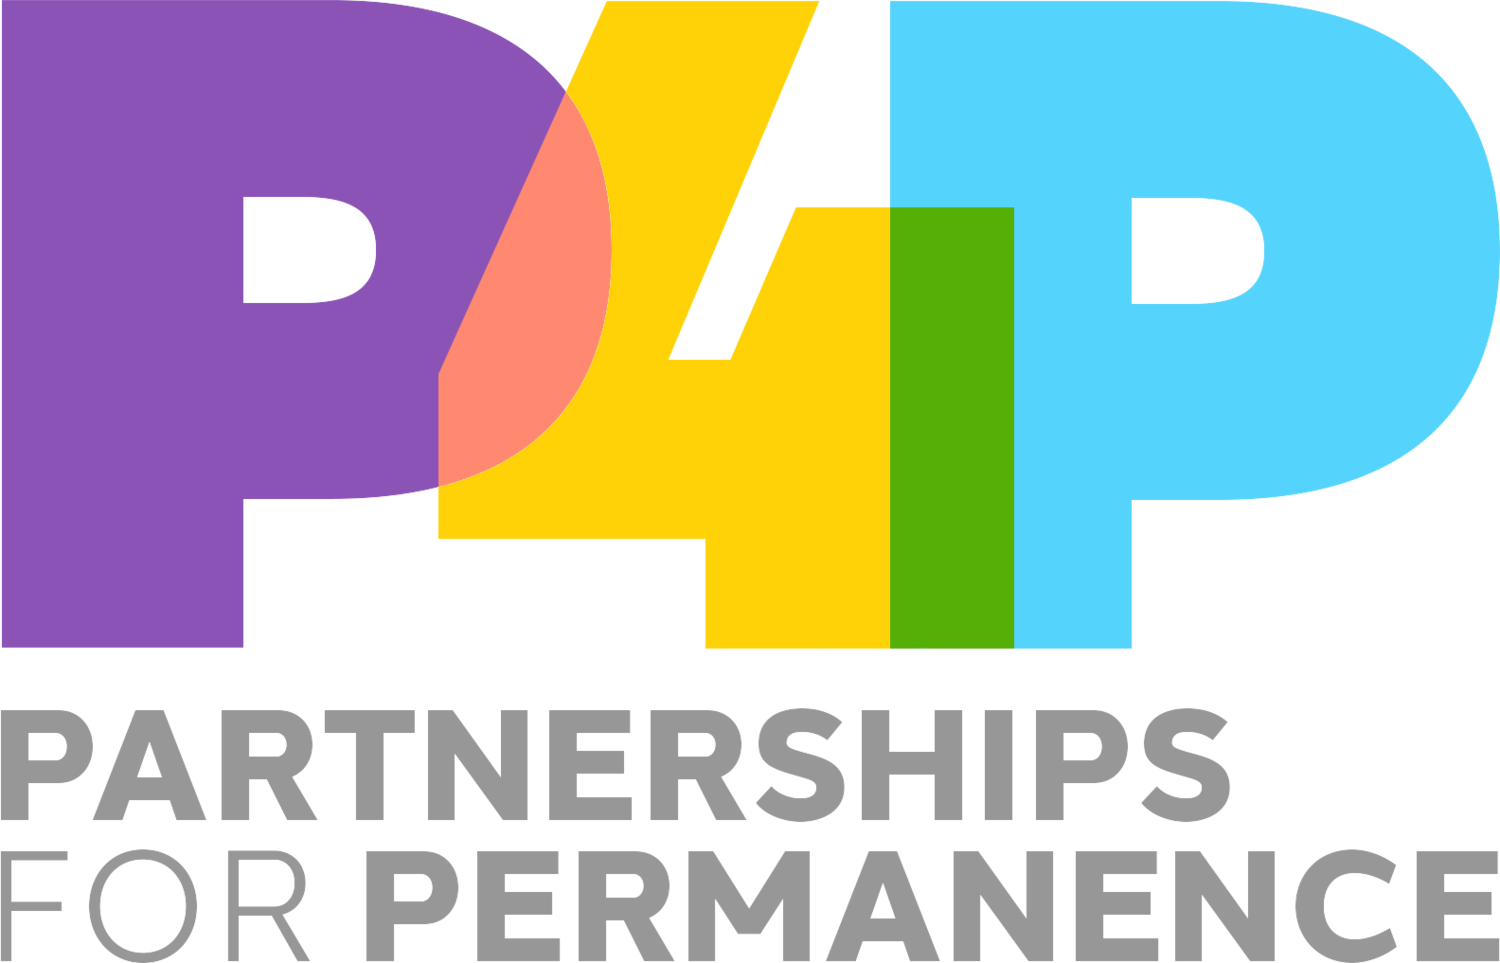 Partnerships for Permanence (P4P)